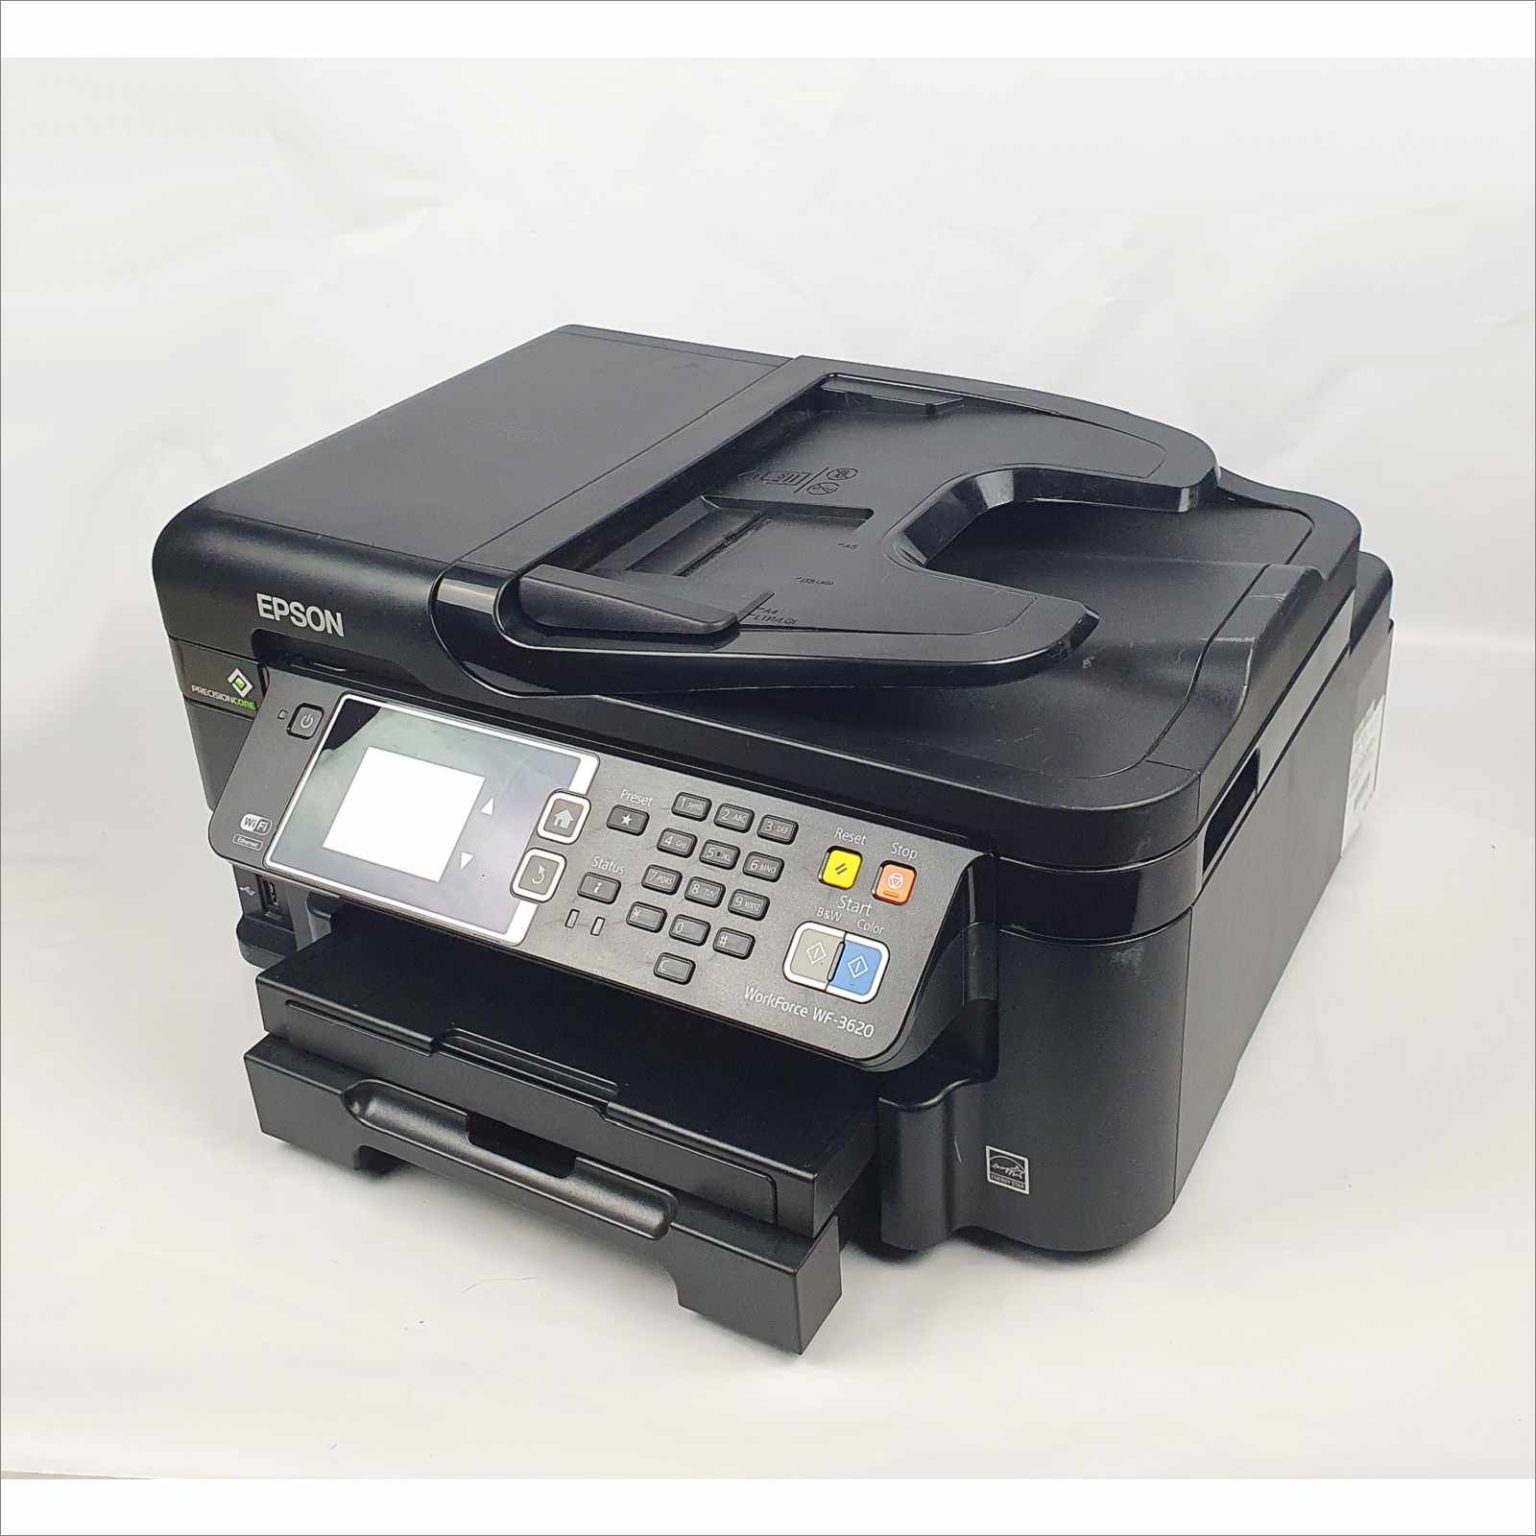 Epson Workforce Wf 3620 All In One Printer Fast Scanner C481d Computer Network Telecom 8109